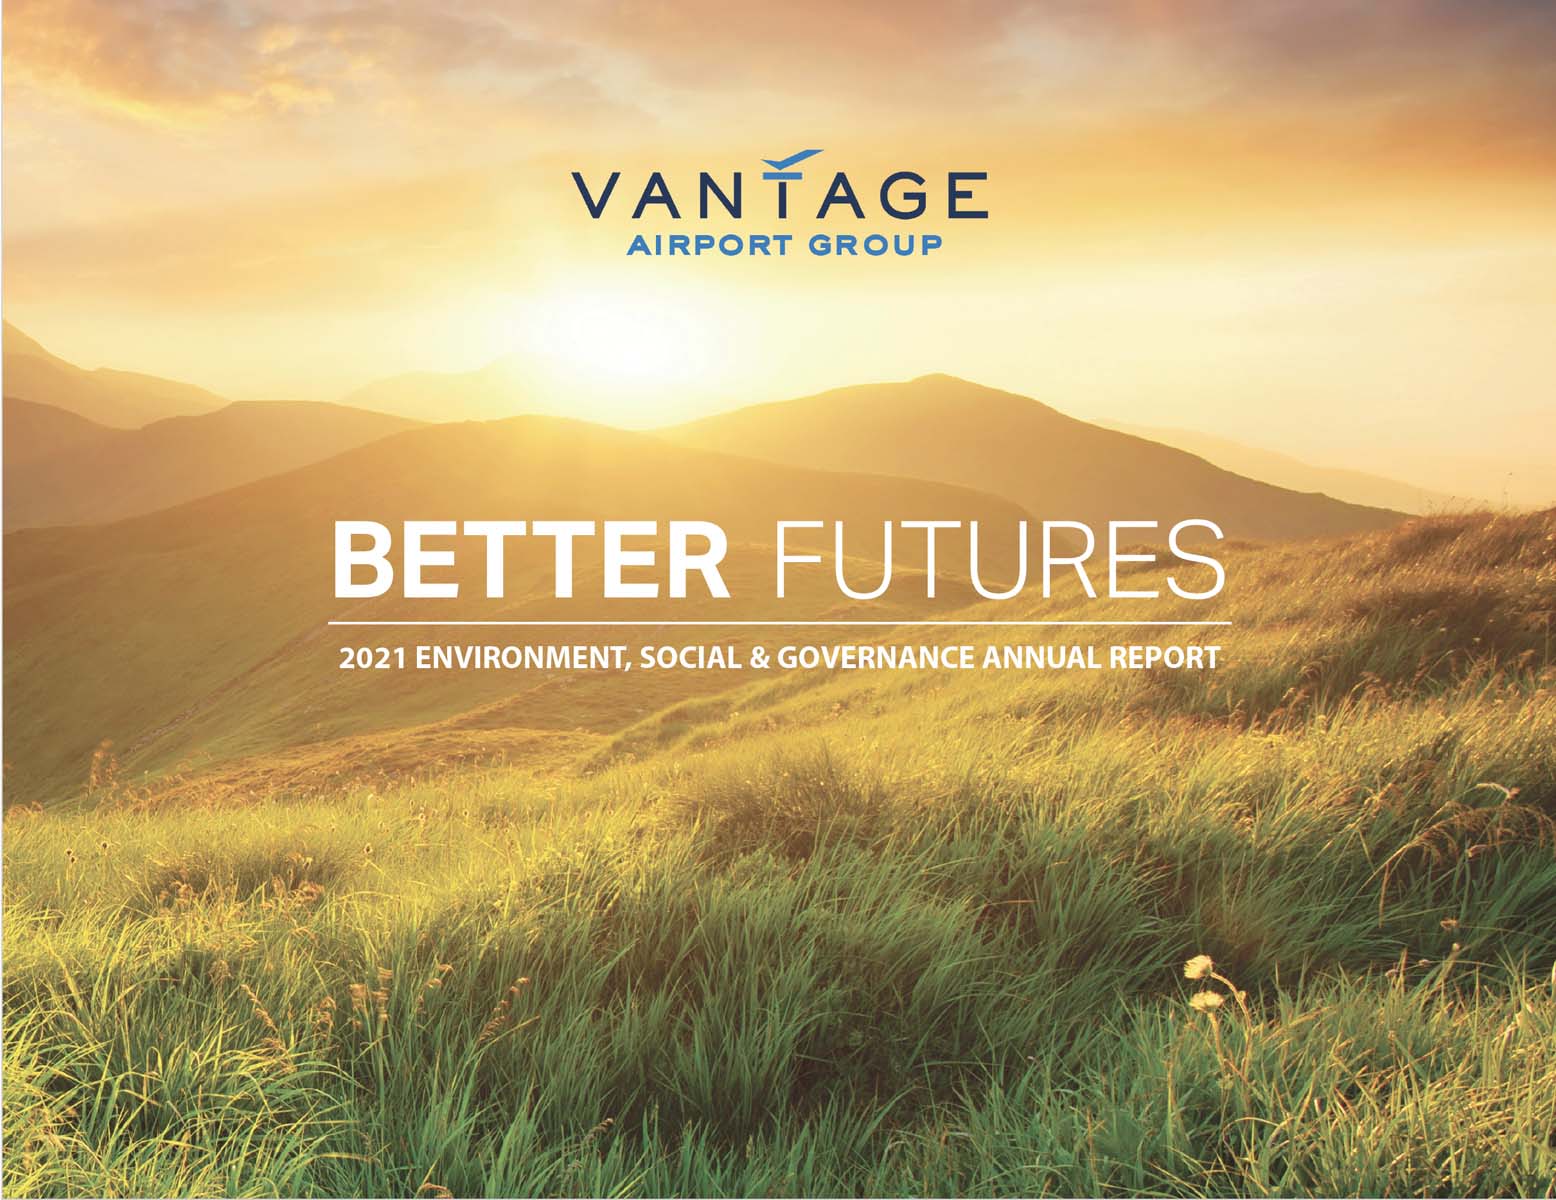 Cover of Vantage ESG 2021 report titled "better futures"